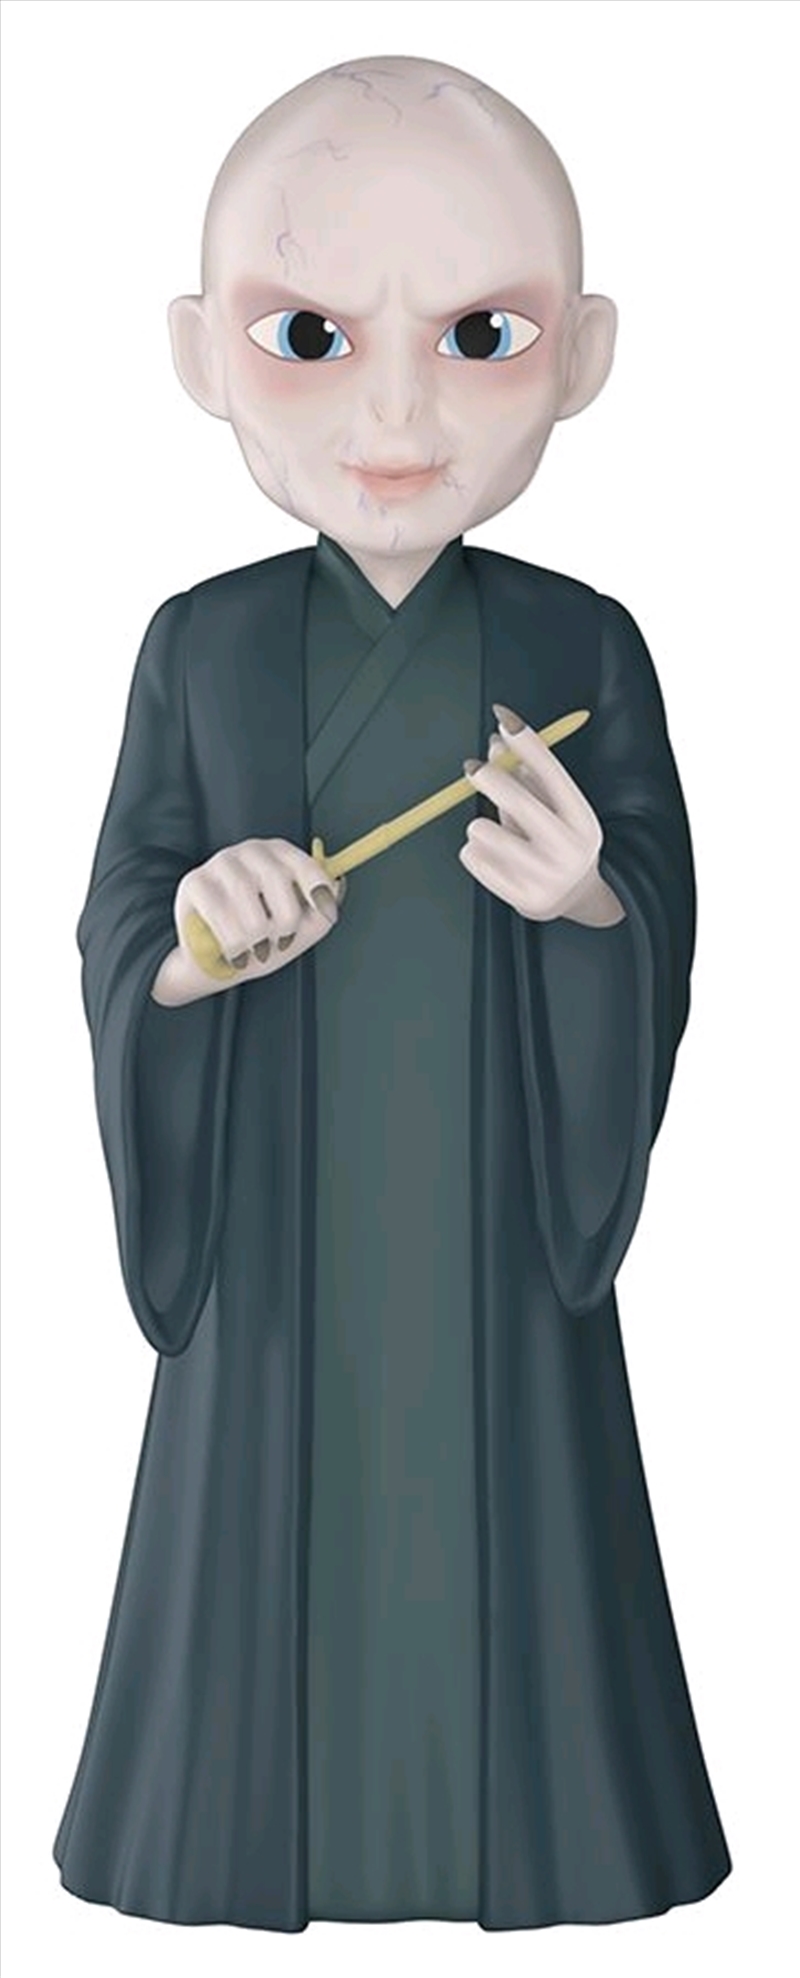 Harry Potter - Lord Voldemort Rock Candy | Merchandise